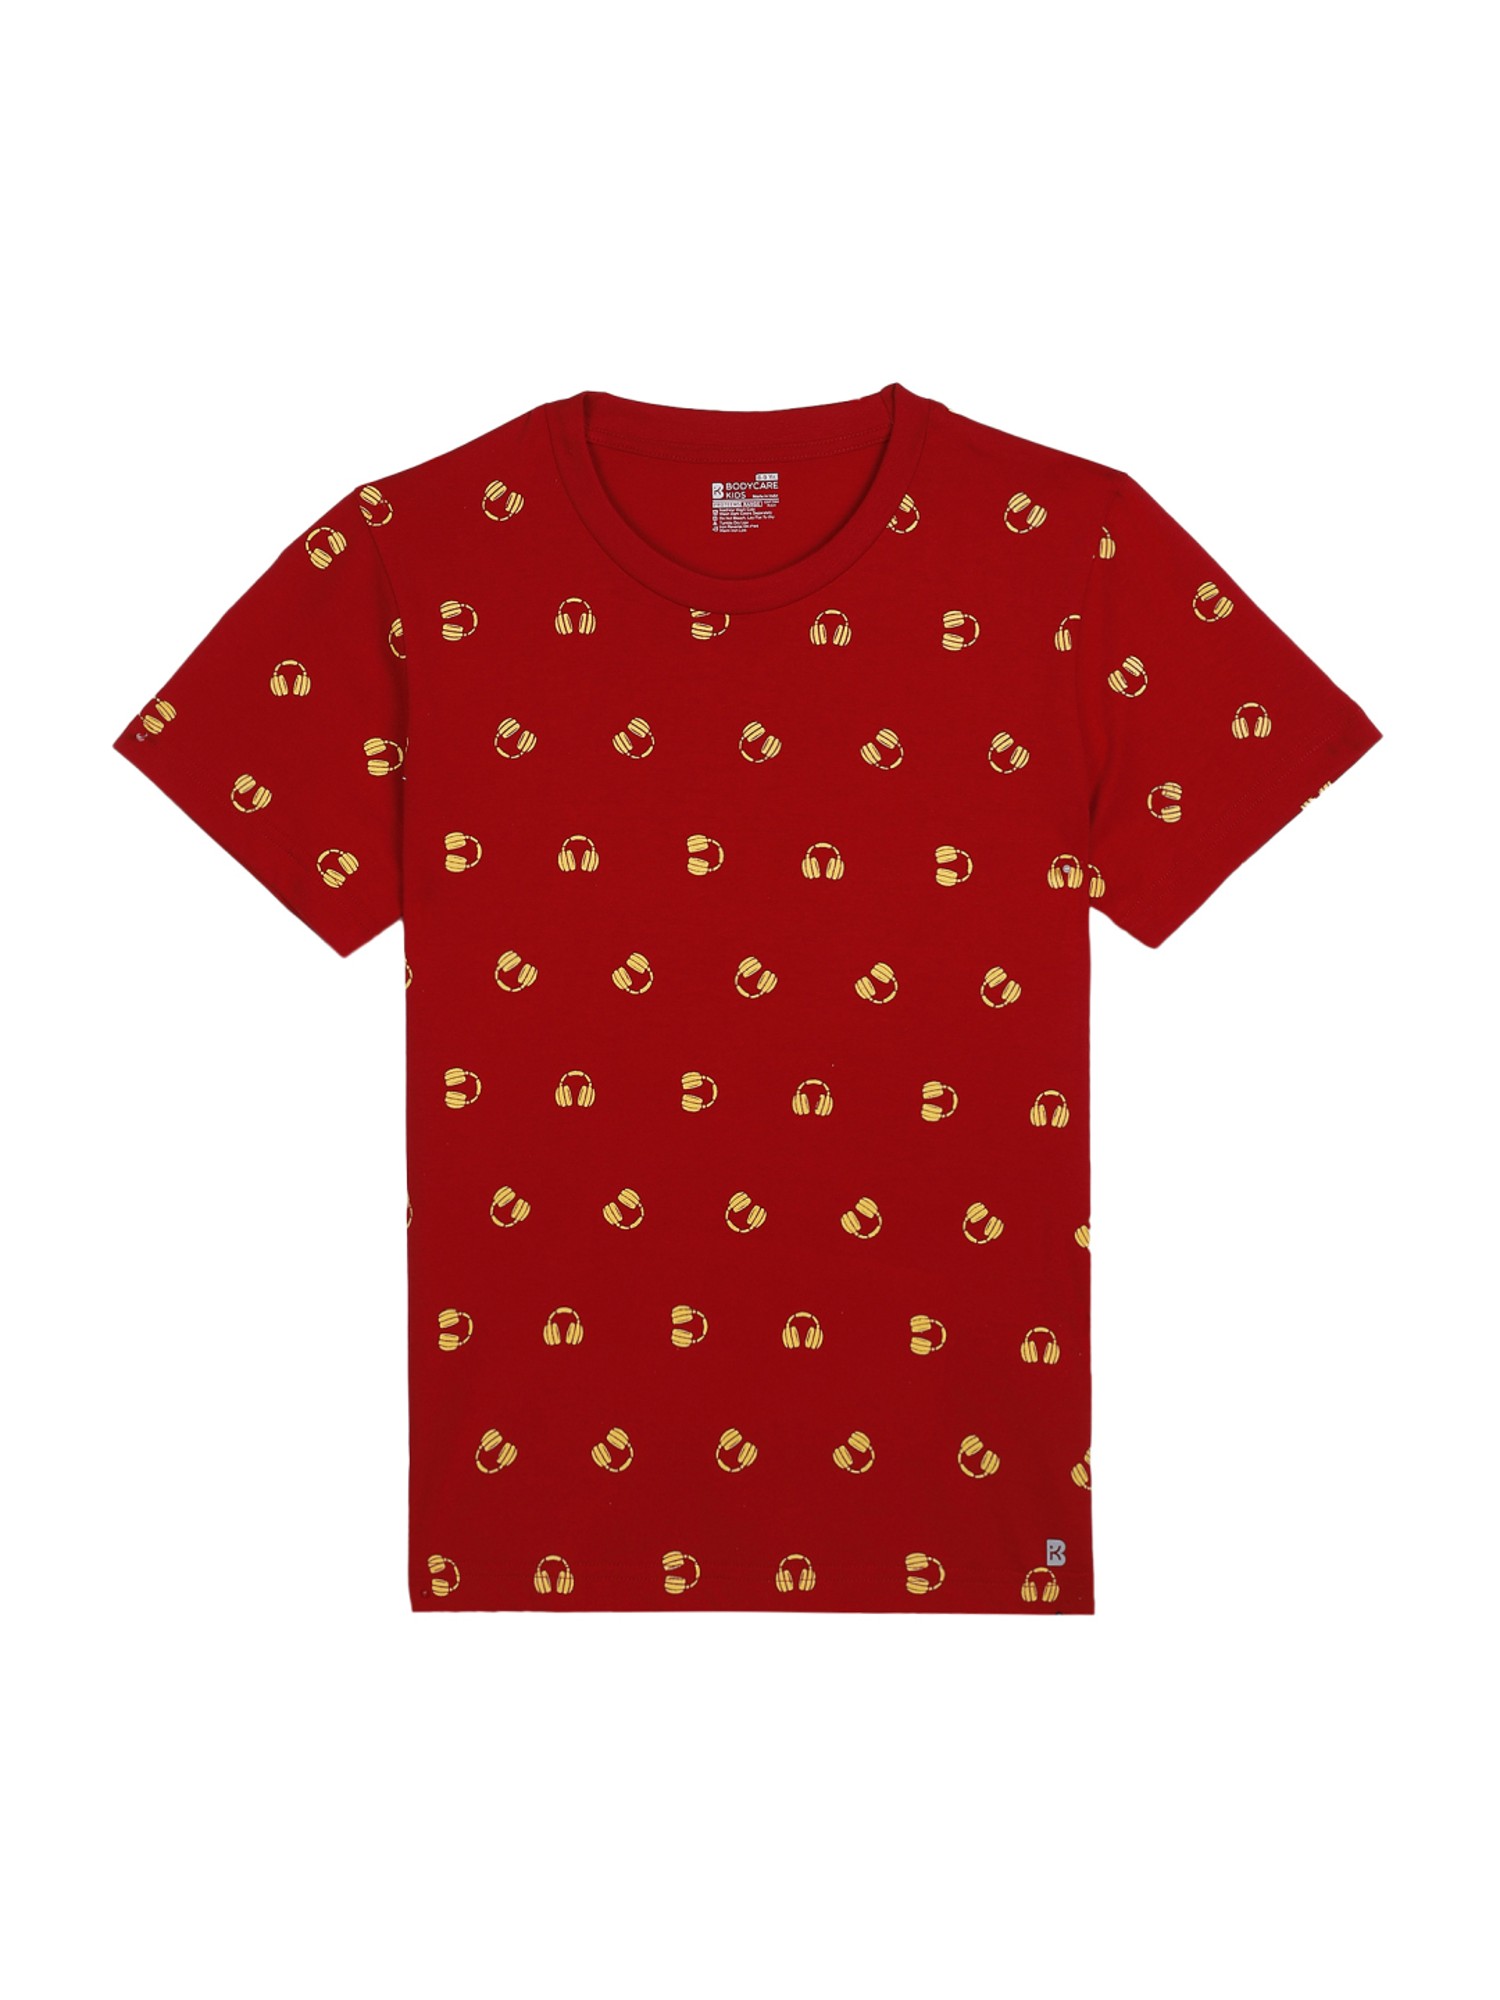 Buy Bodycare Kids Red & Royal Blue Printed T-Shirts - Pack of 2 for Boys  Clothing Online @ Tata CLiQ